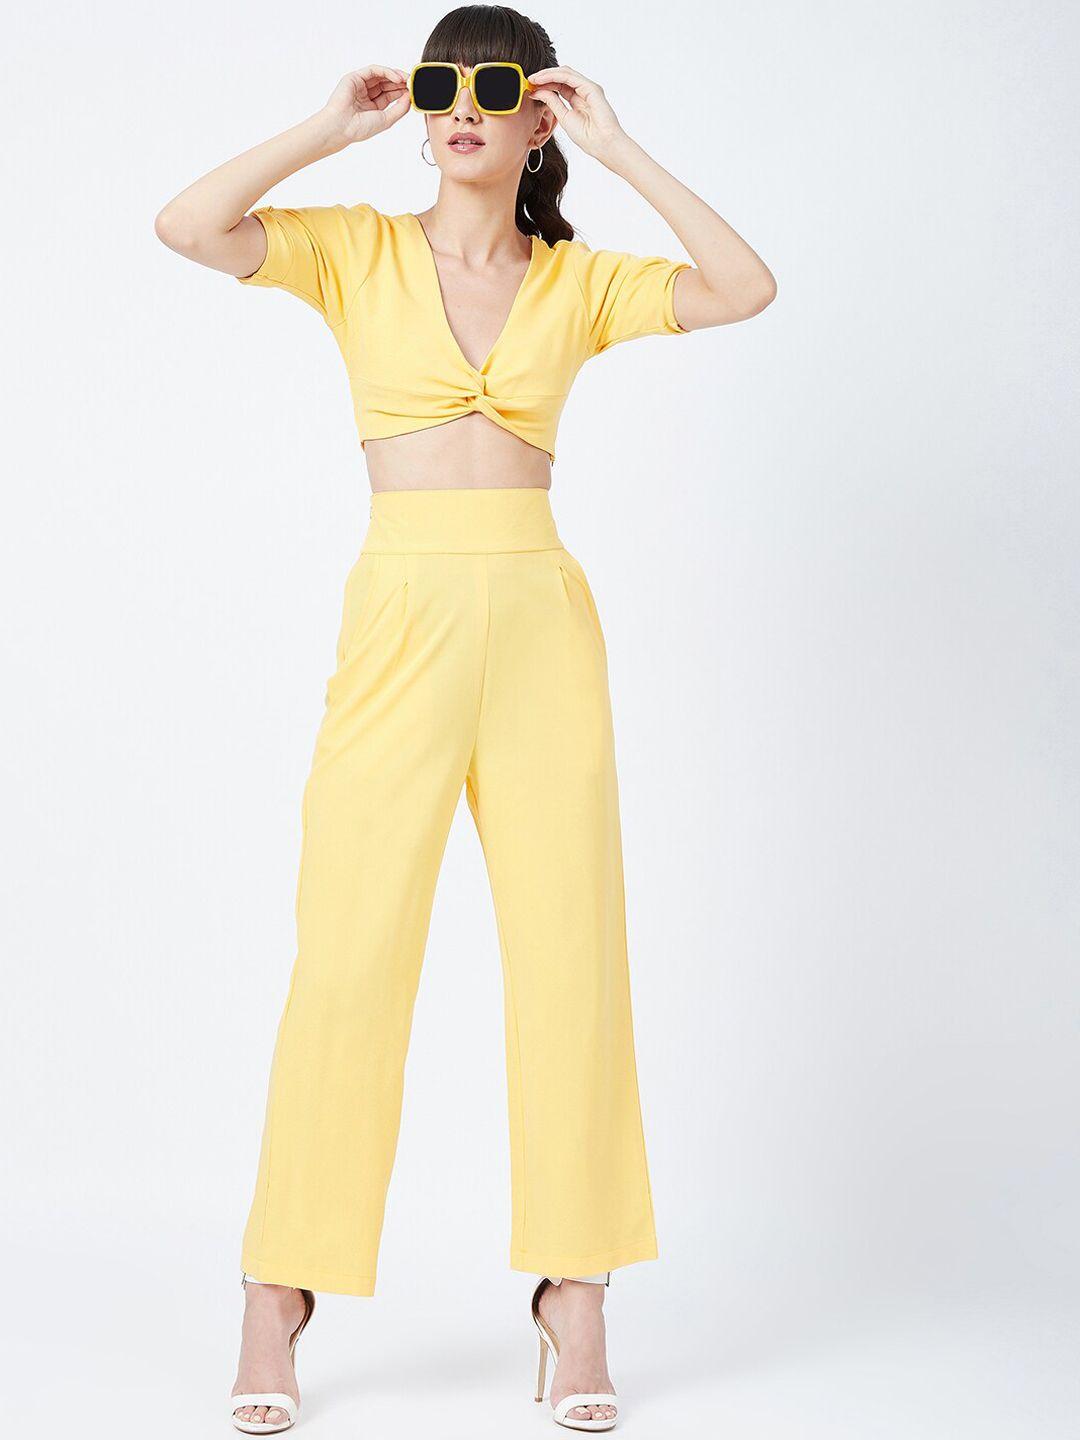 delan women yellow solid co-ord  sets